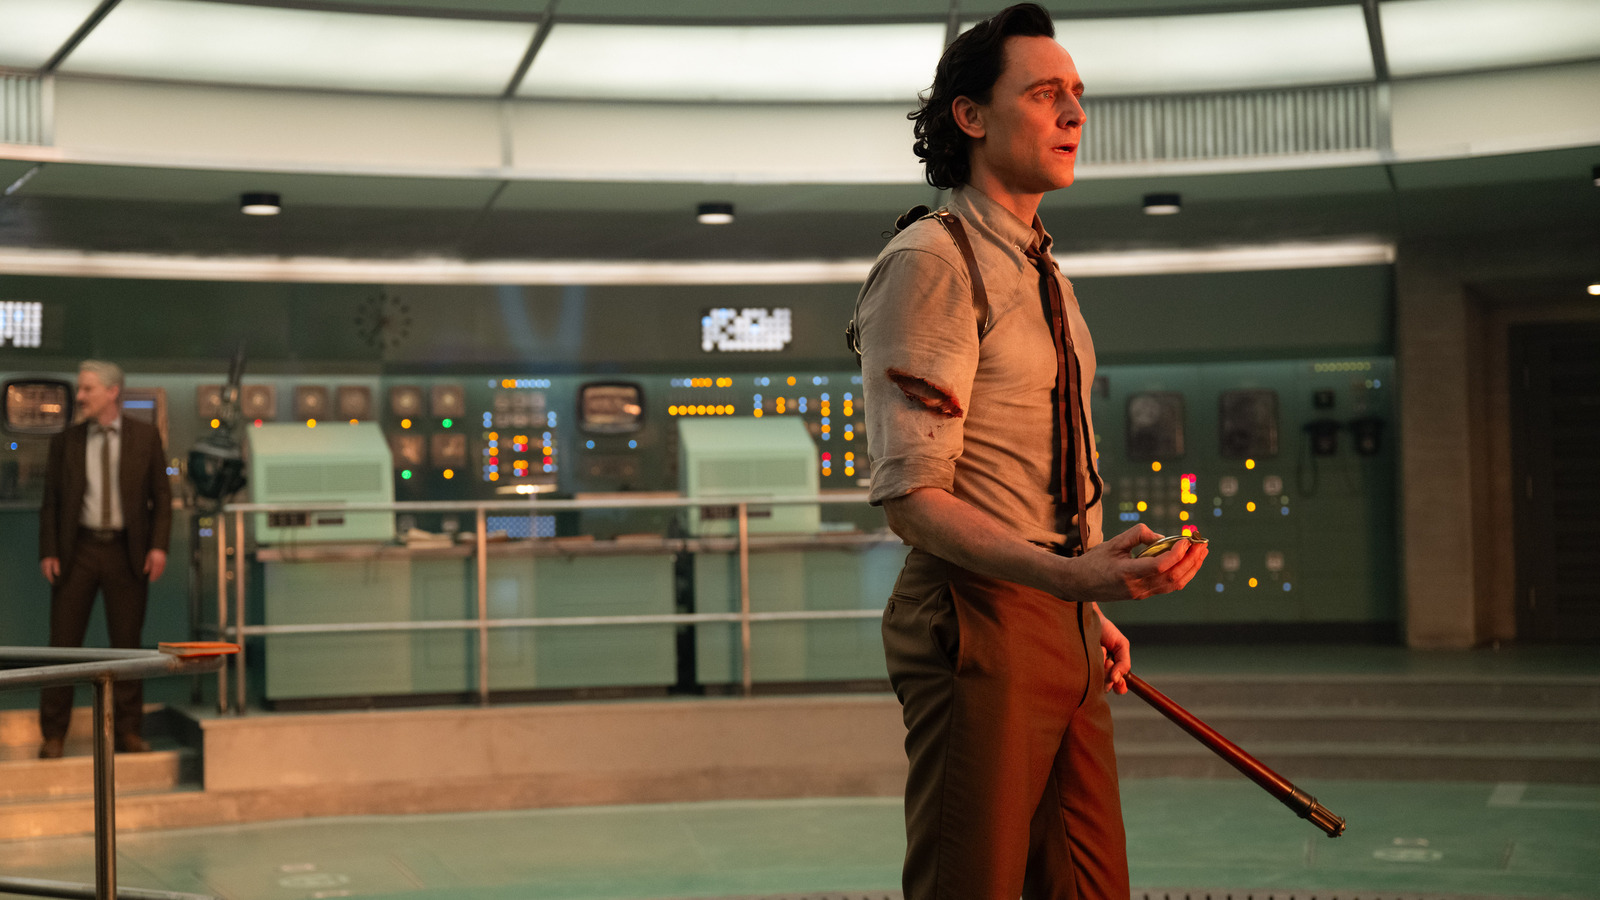 Loki Season 2 Episode 4 Solves An Episode 1 Mystery, But What The Heck Is Going On? – /Film